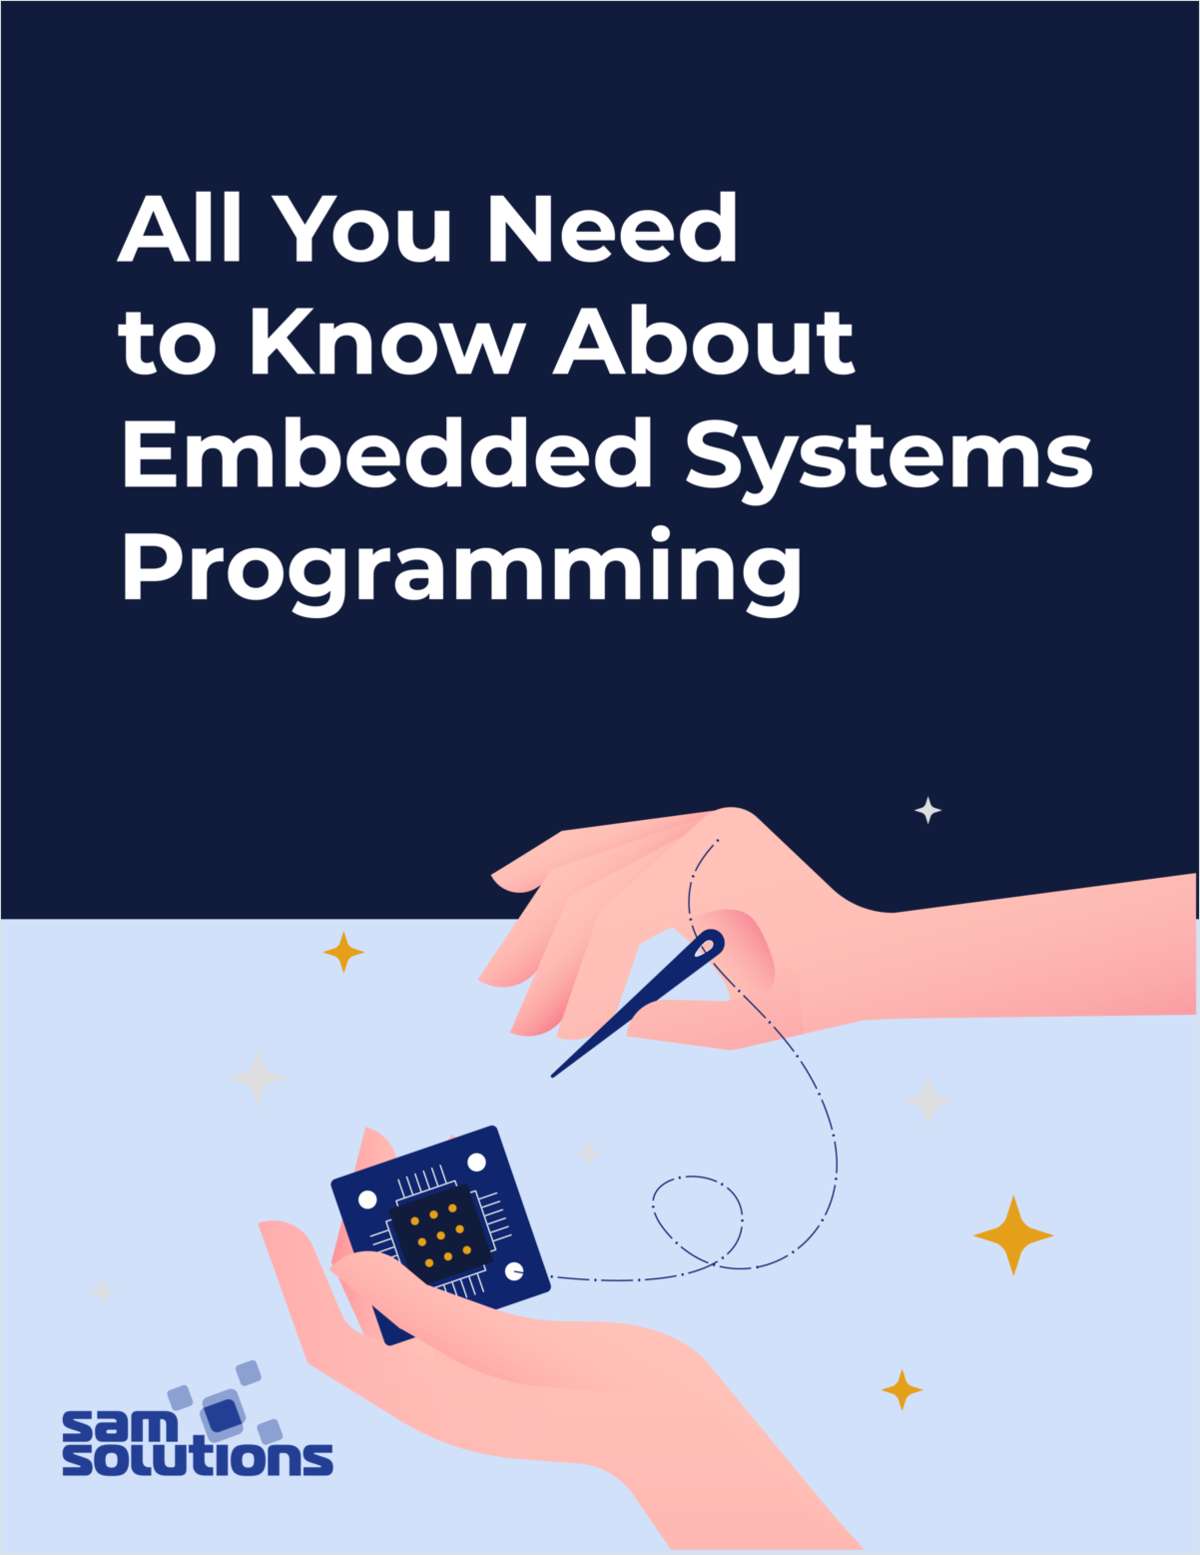 All You Need to Know About Embedded Systems Programming for Start-ups